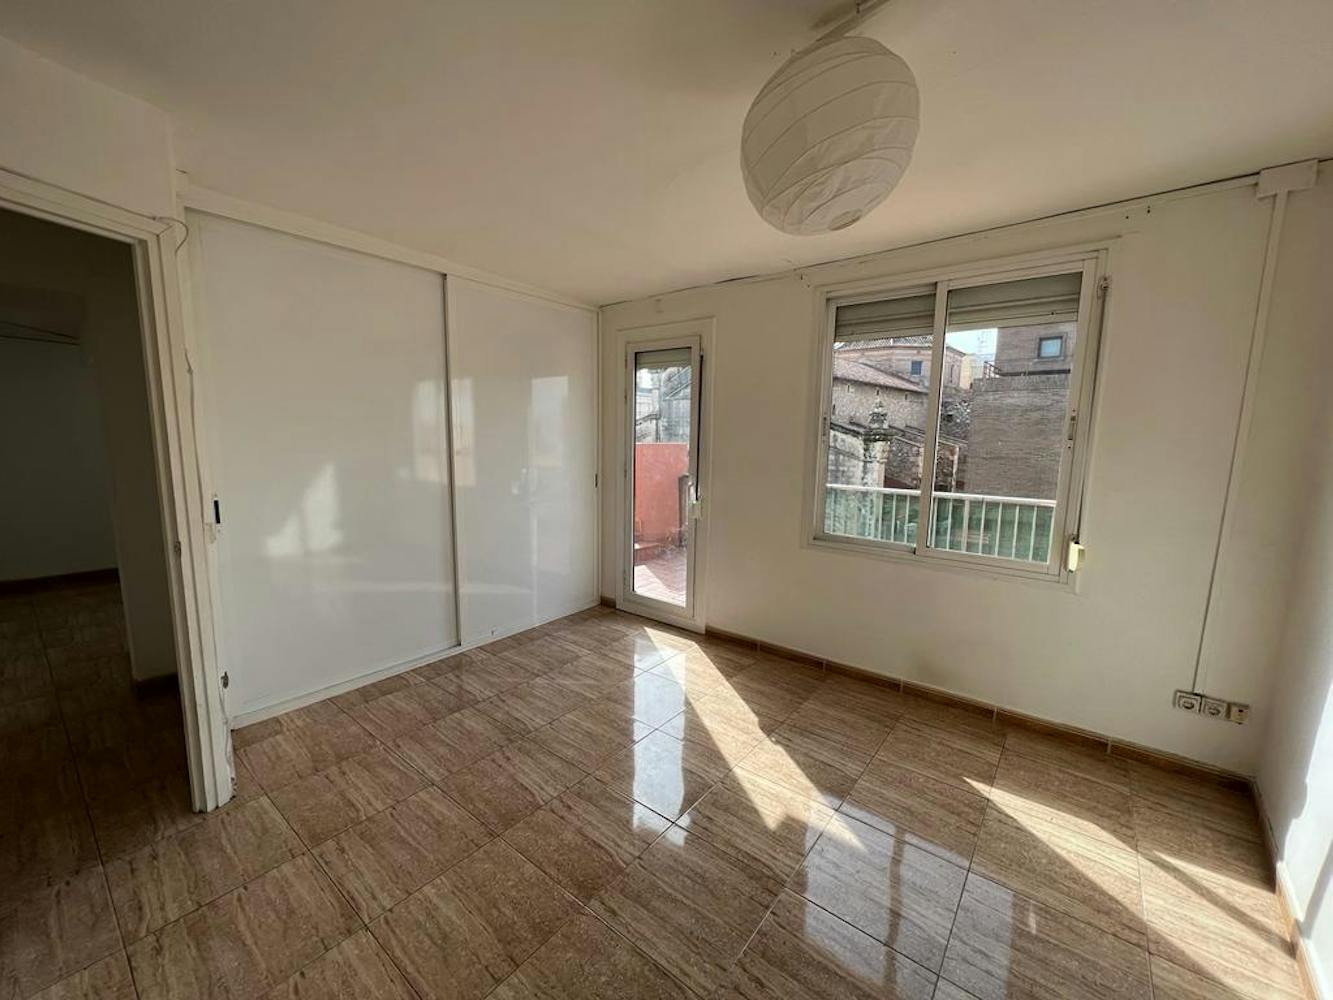 Photo of the dining room in a flat for rent